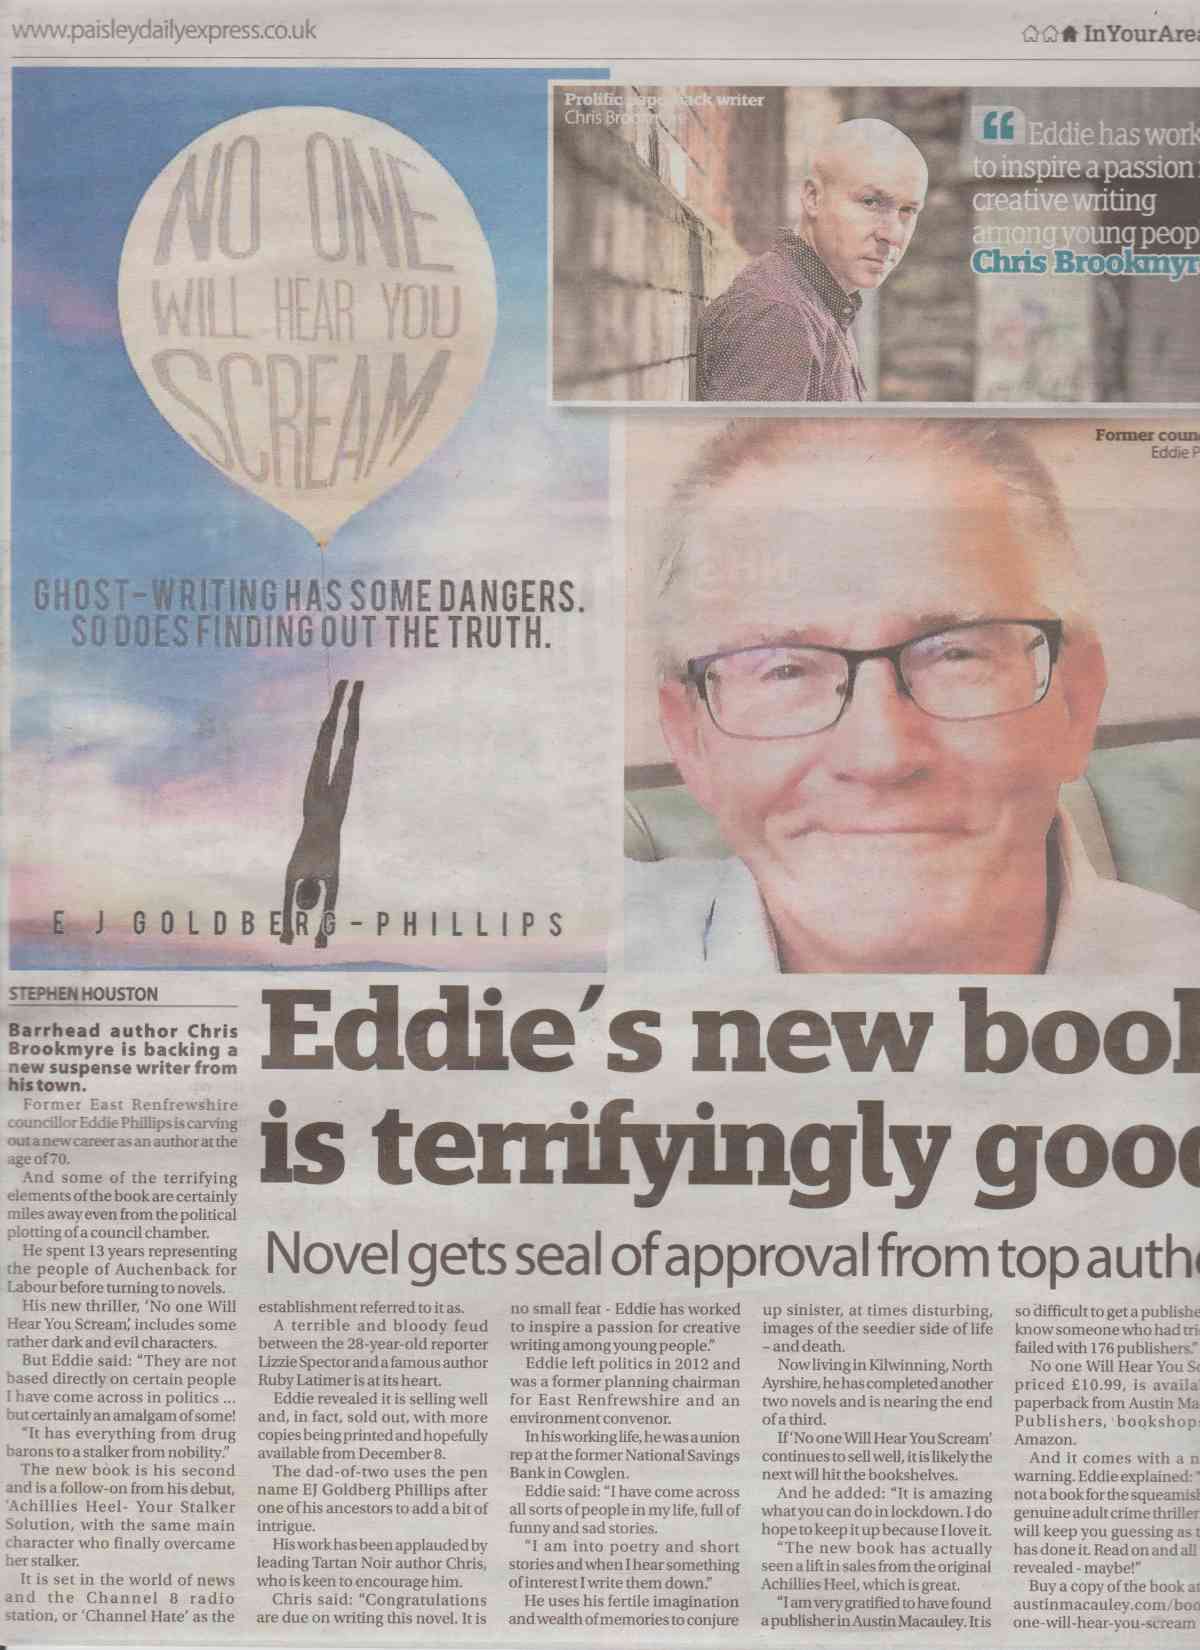 E-J-Goldberg-Phillips-new-crime-thriller,-No-One-Will-Hear-You-Scream,-featured-by-Paisley-Daily-Express